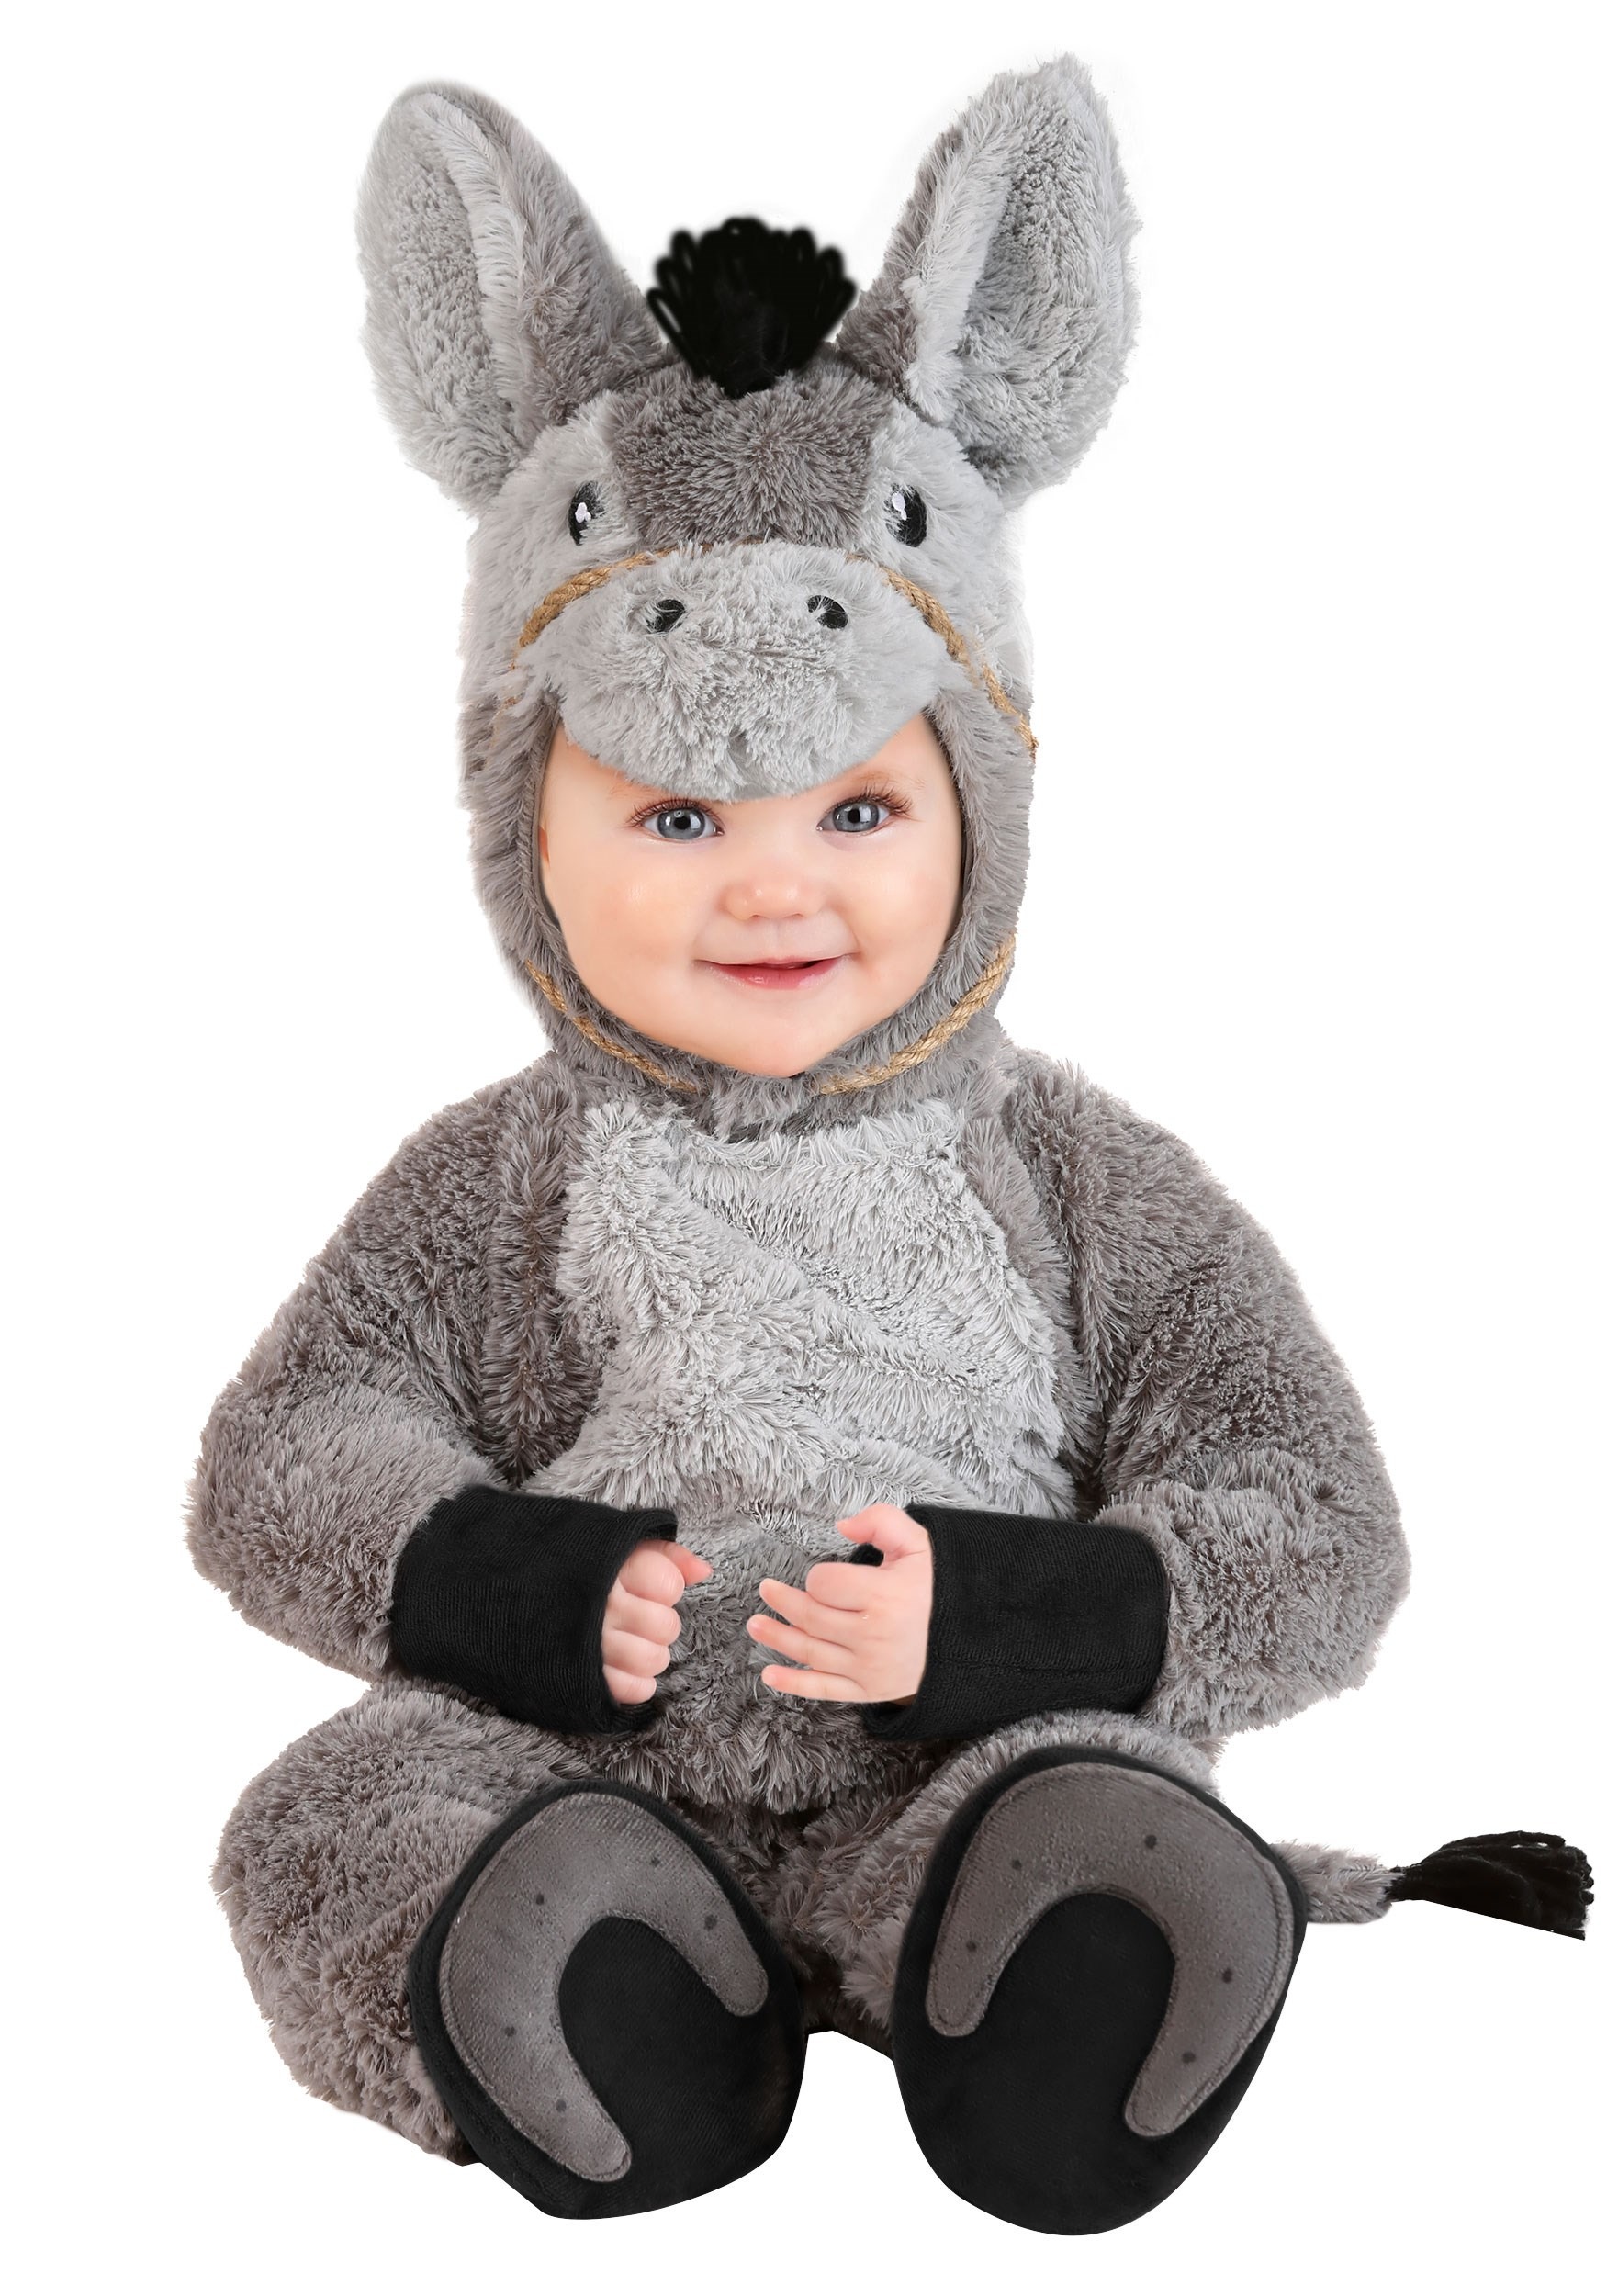 Photos - Fancy Dress FUN Costumes Donkey Costume for Infants Gray FUN0503IN